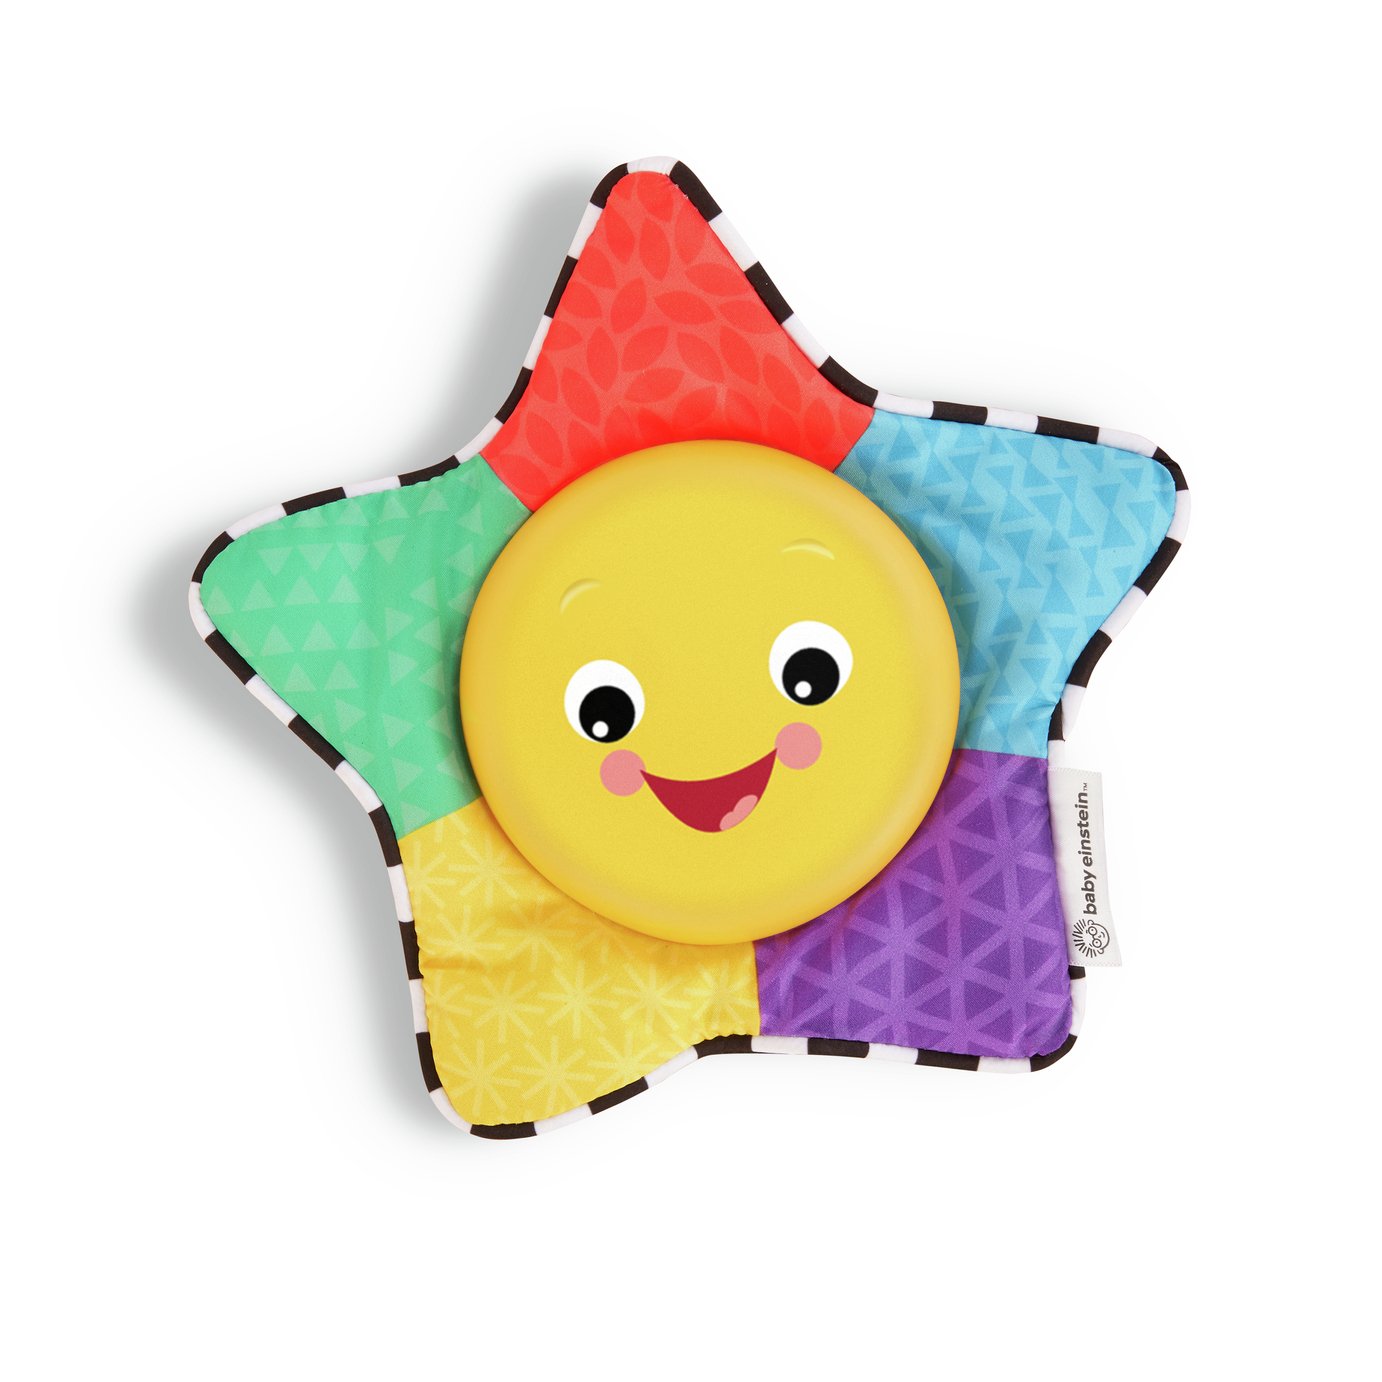 Baby Einstein Star Bright Melodies Take Along Toy Review